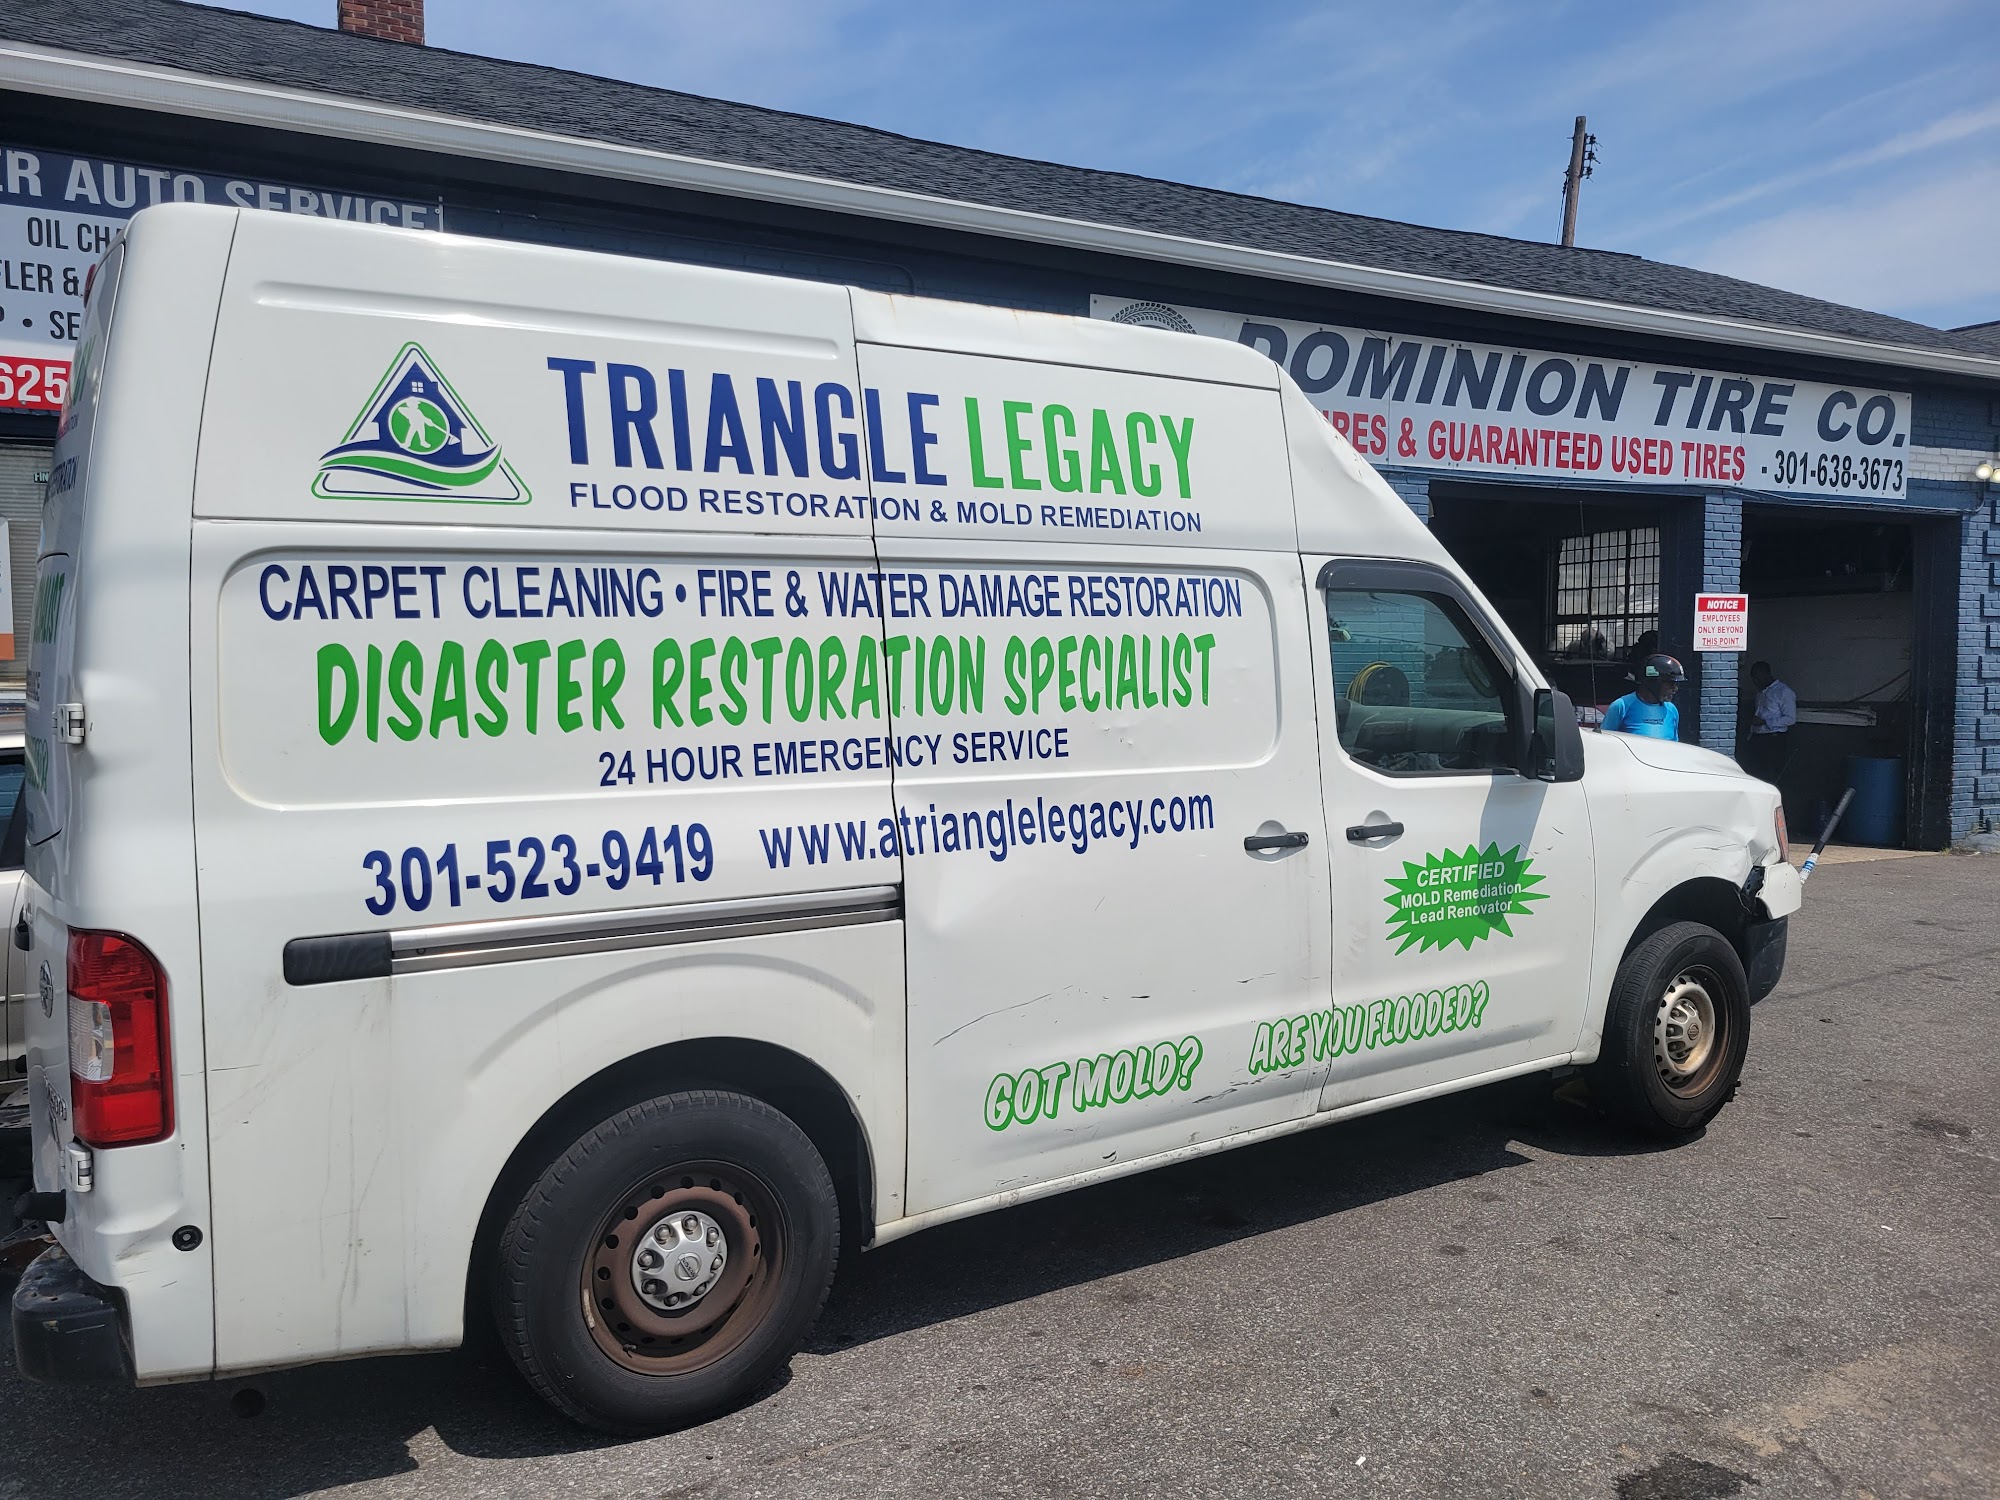 Triangle Legacy Flood Restoration & Carpet Cleaning